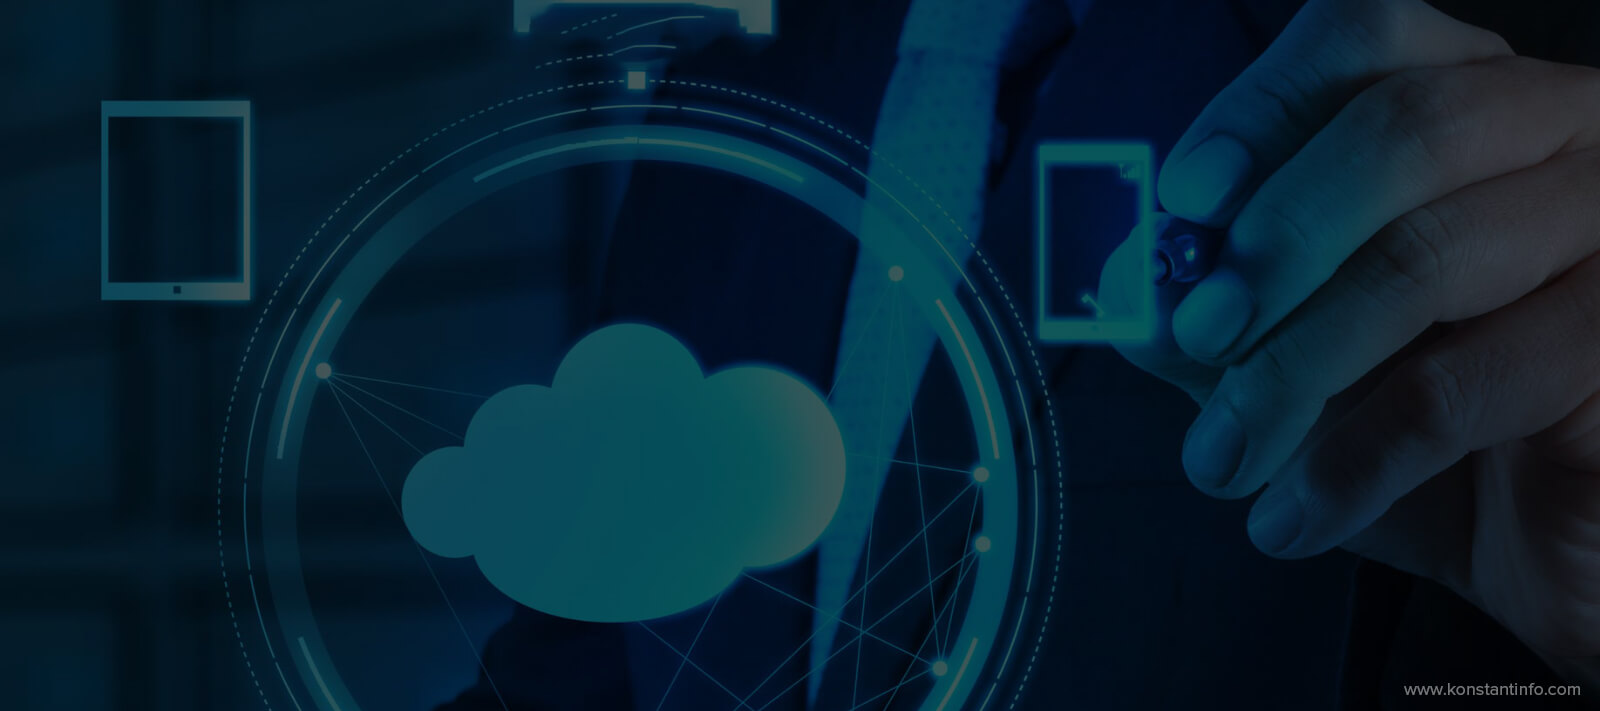 5 Things to Consider for an Ideal Cloud App Development Platform